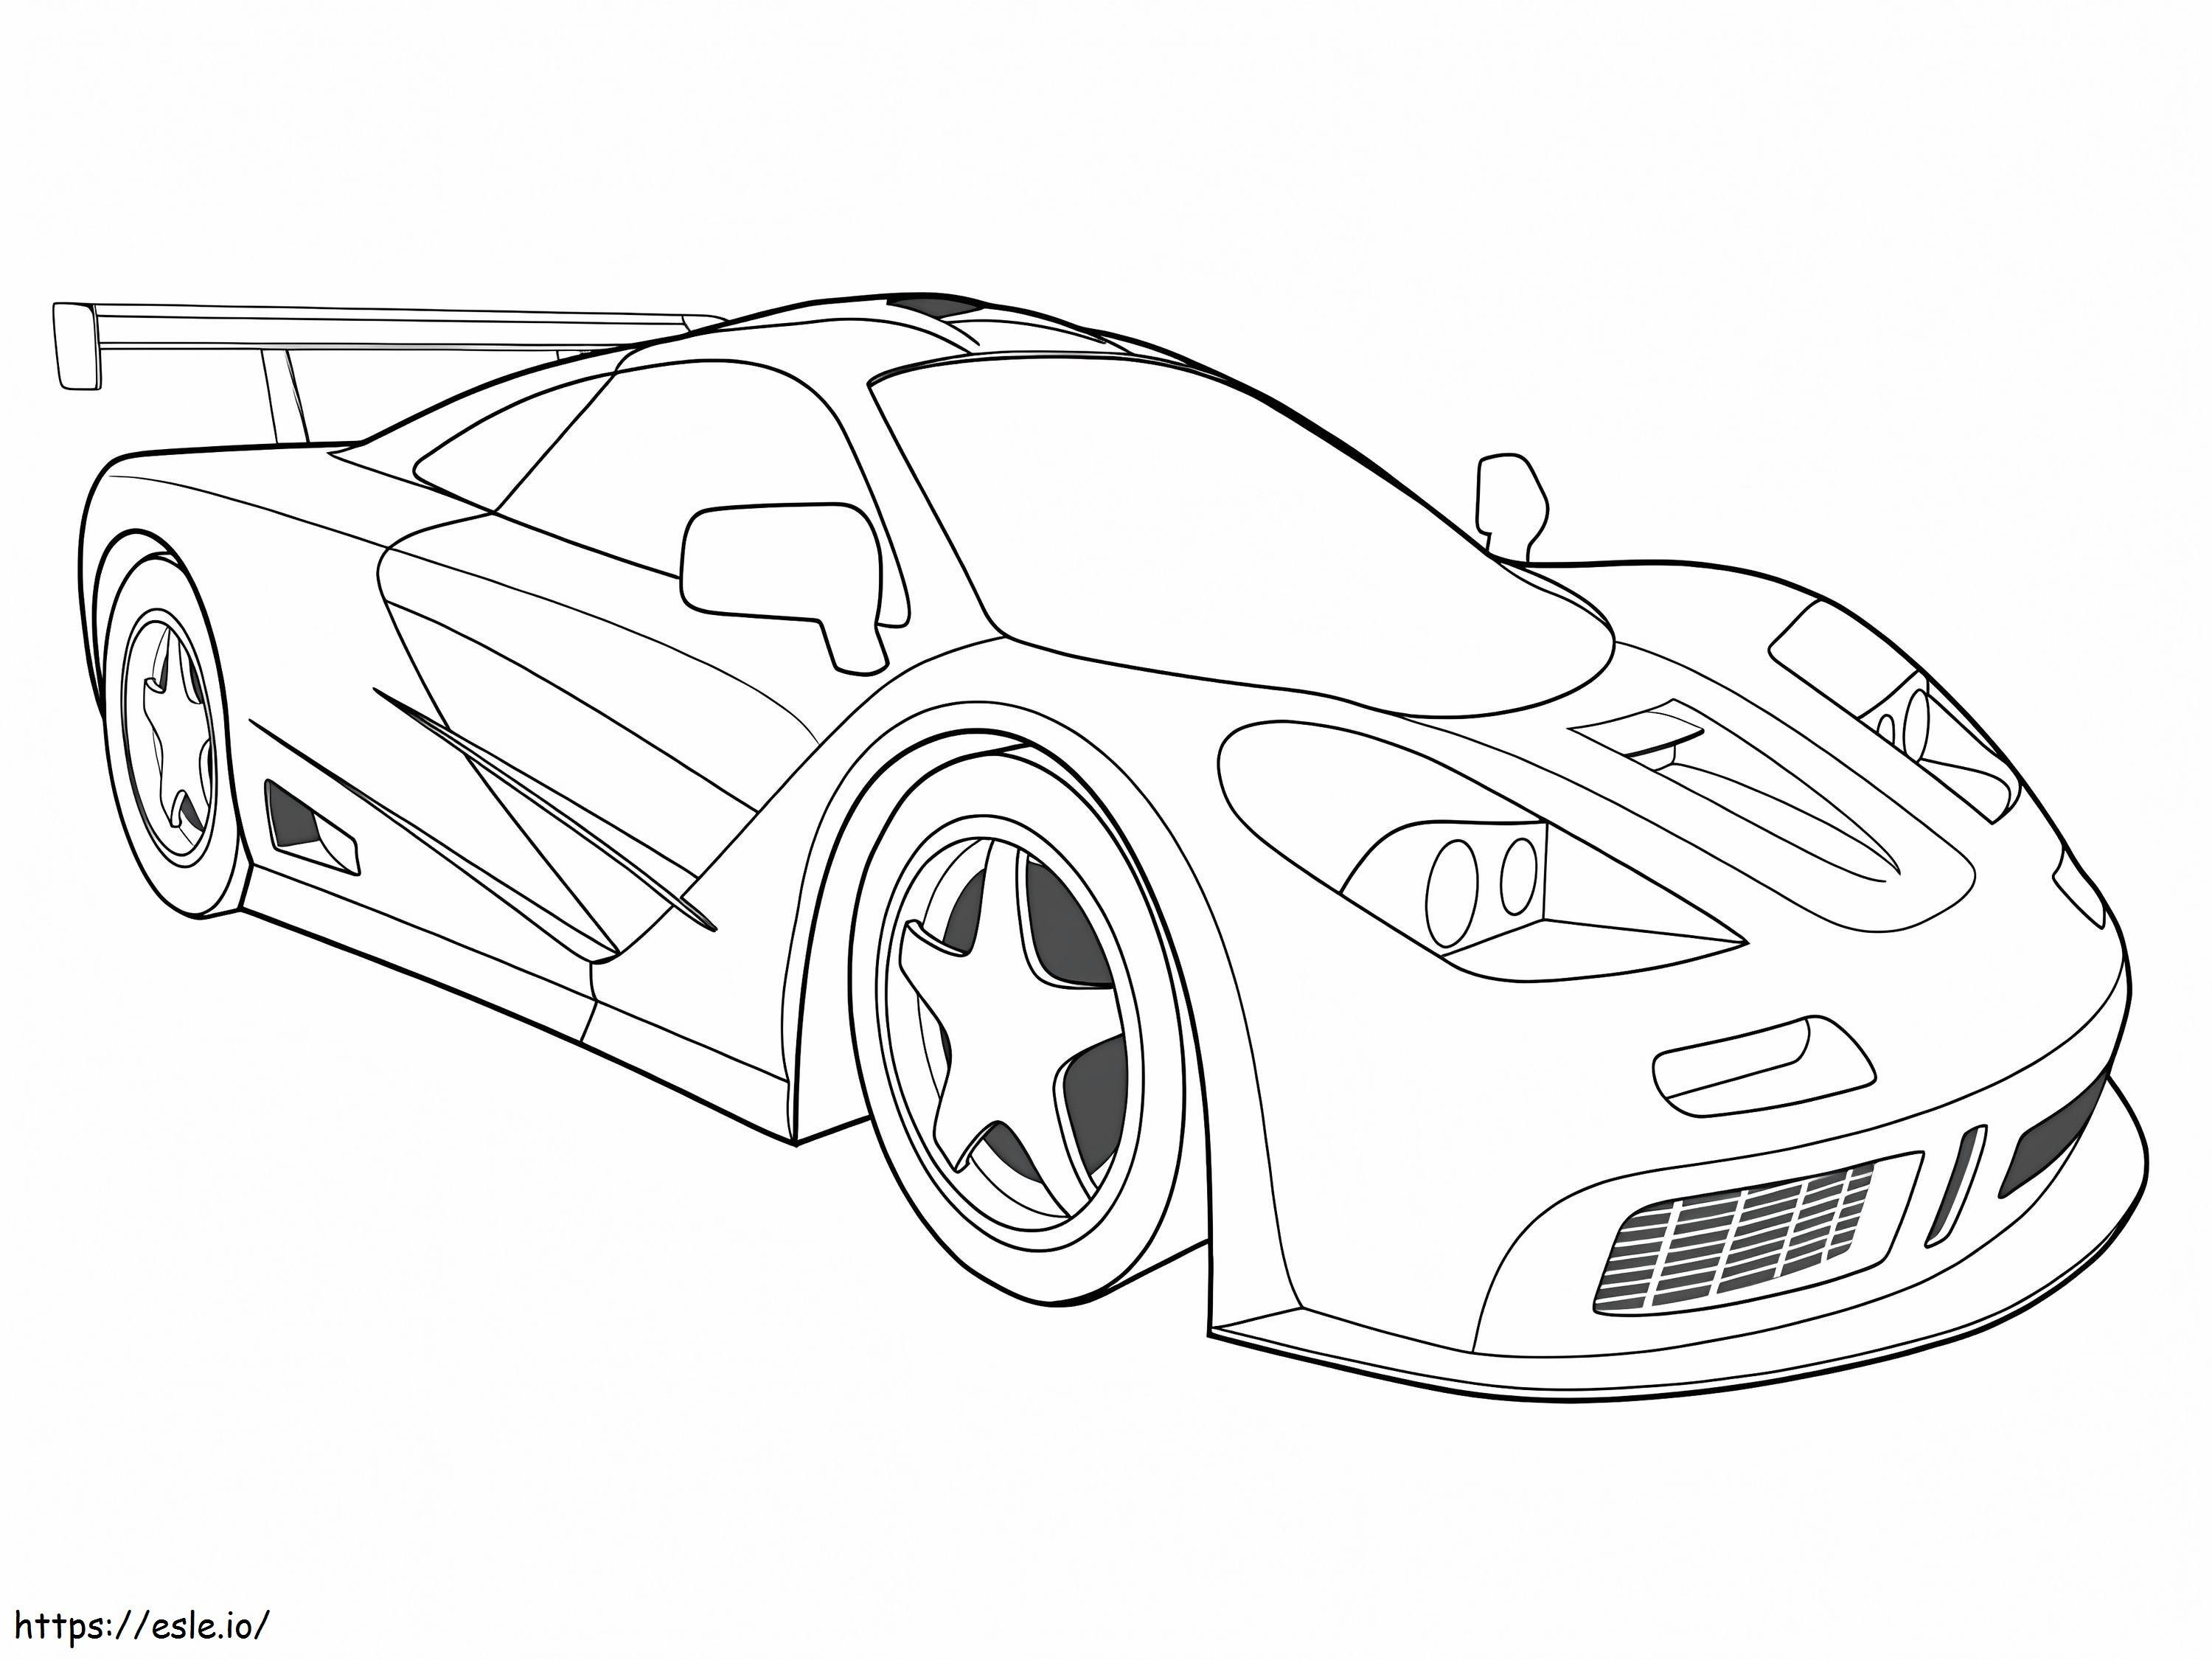 Race Car coloring page